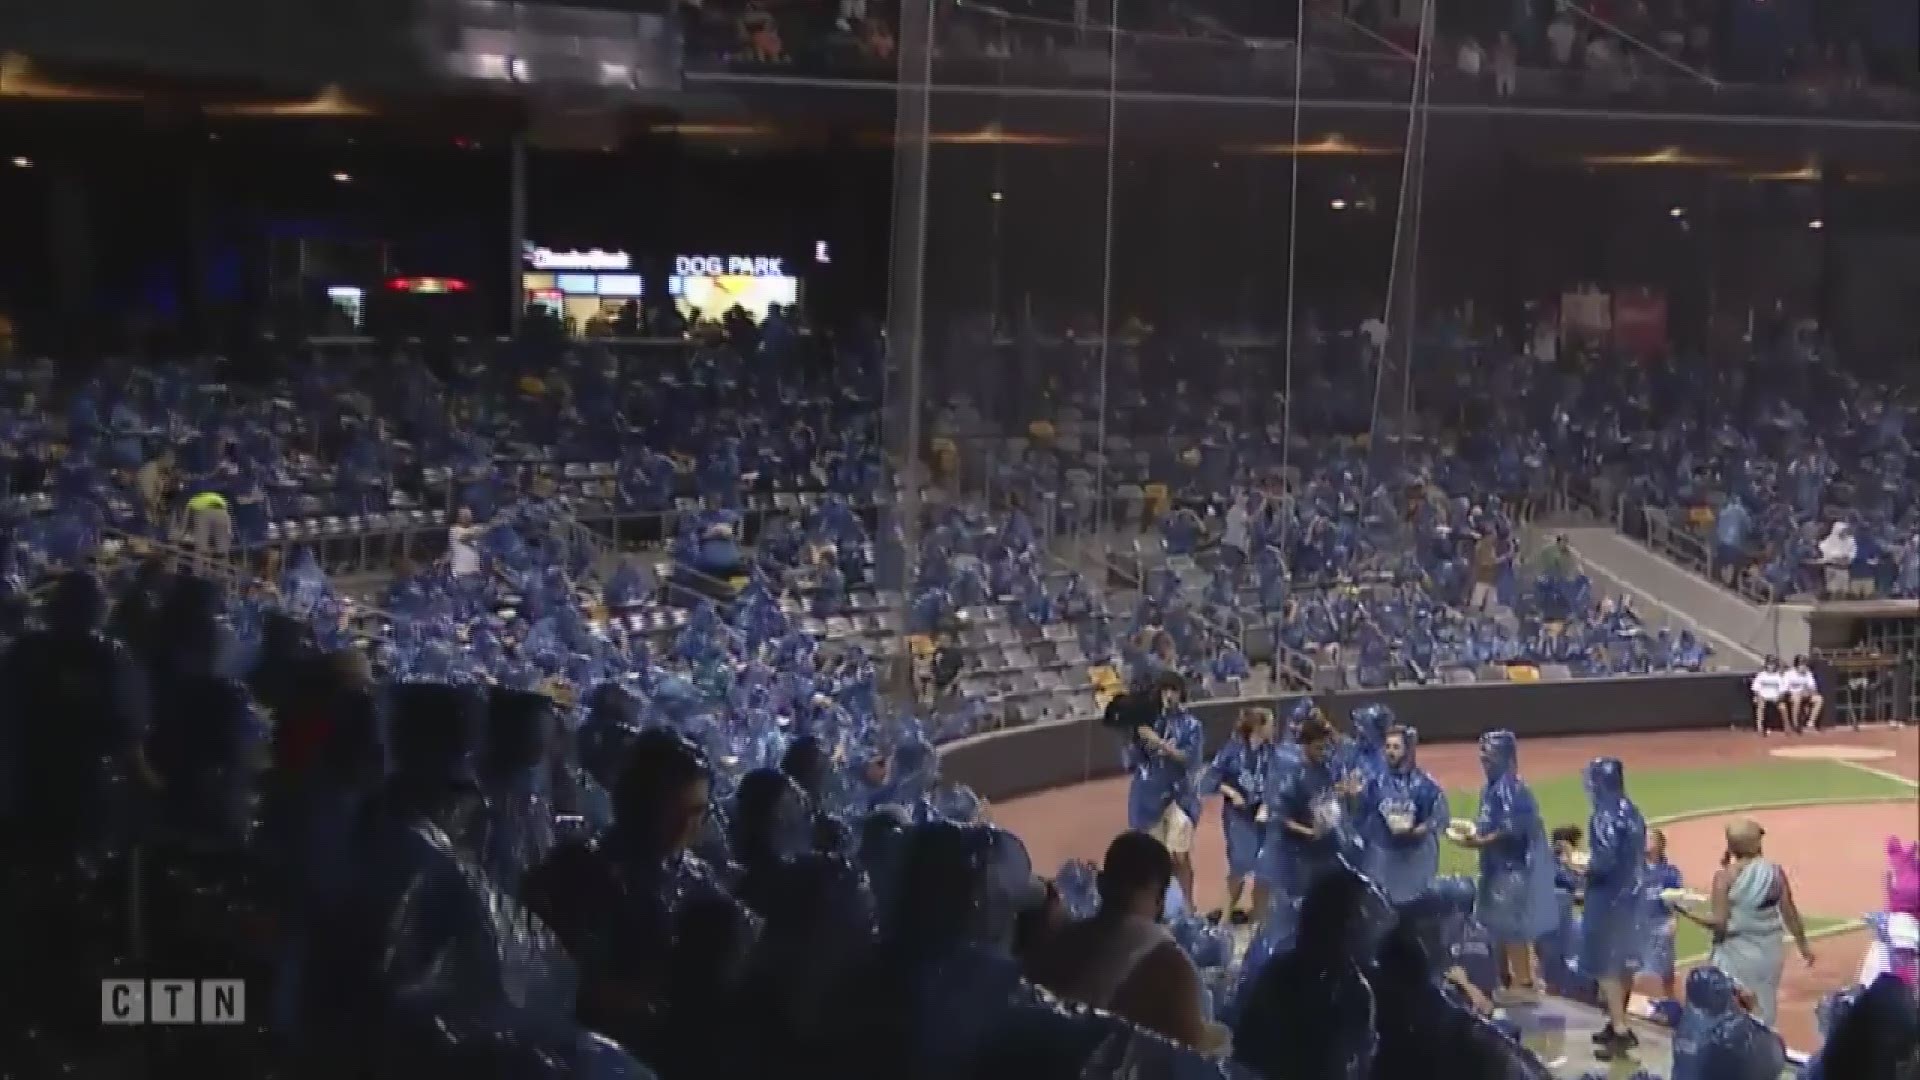 Leave it to the Saint Paul Saints to stage a massive food fight involving 8,000 people.